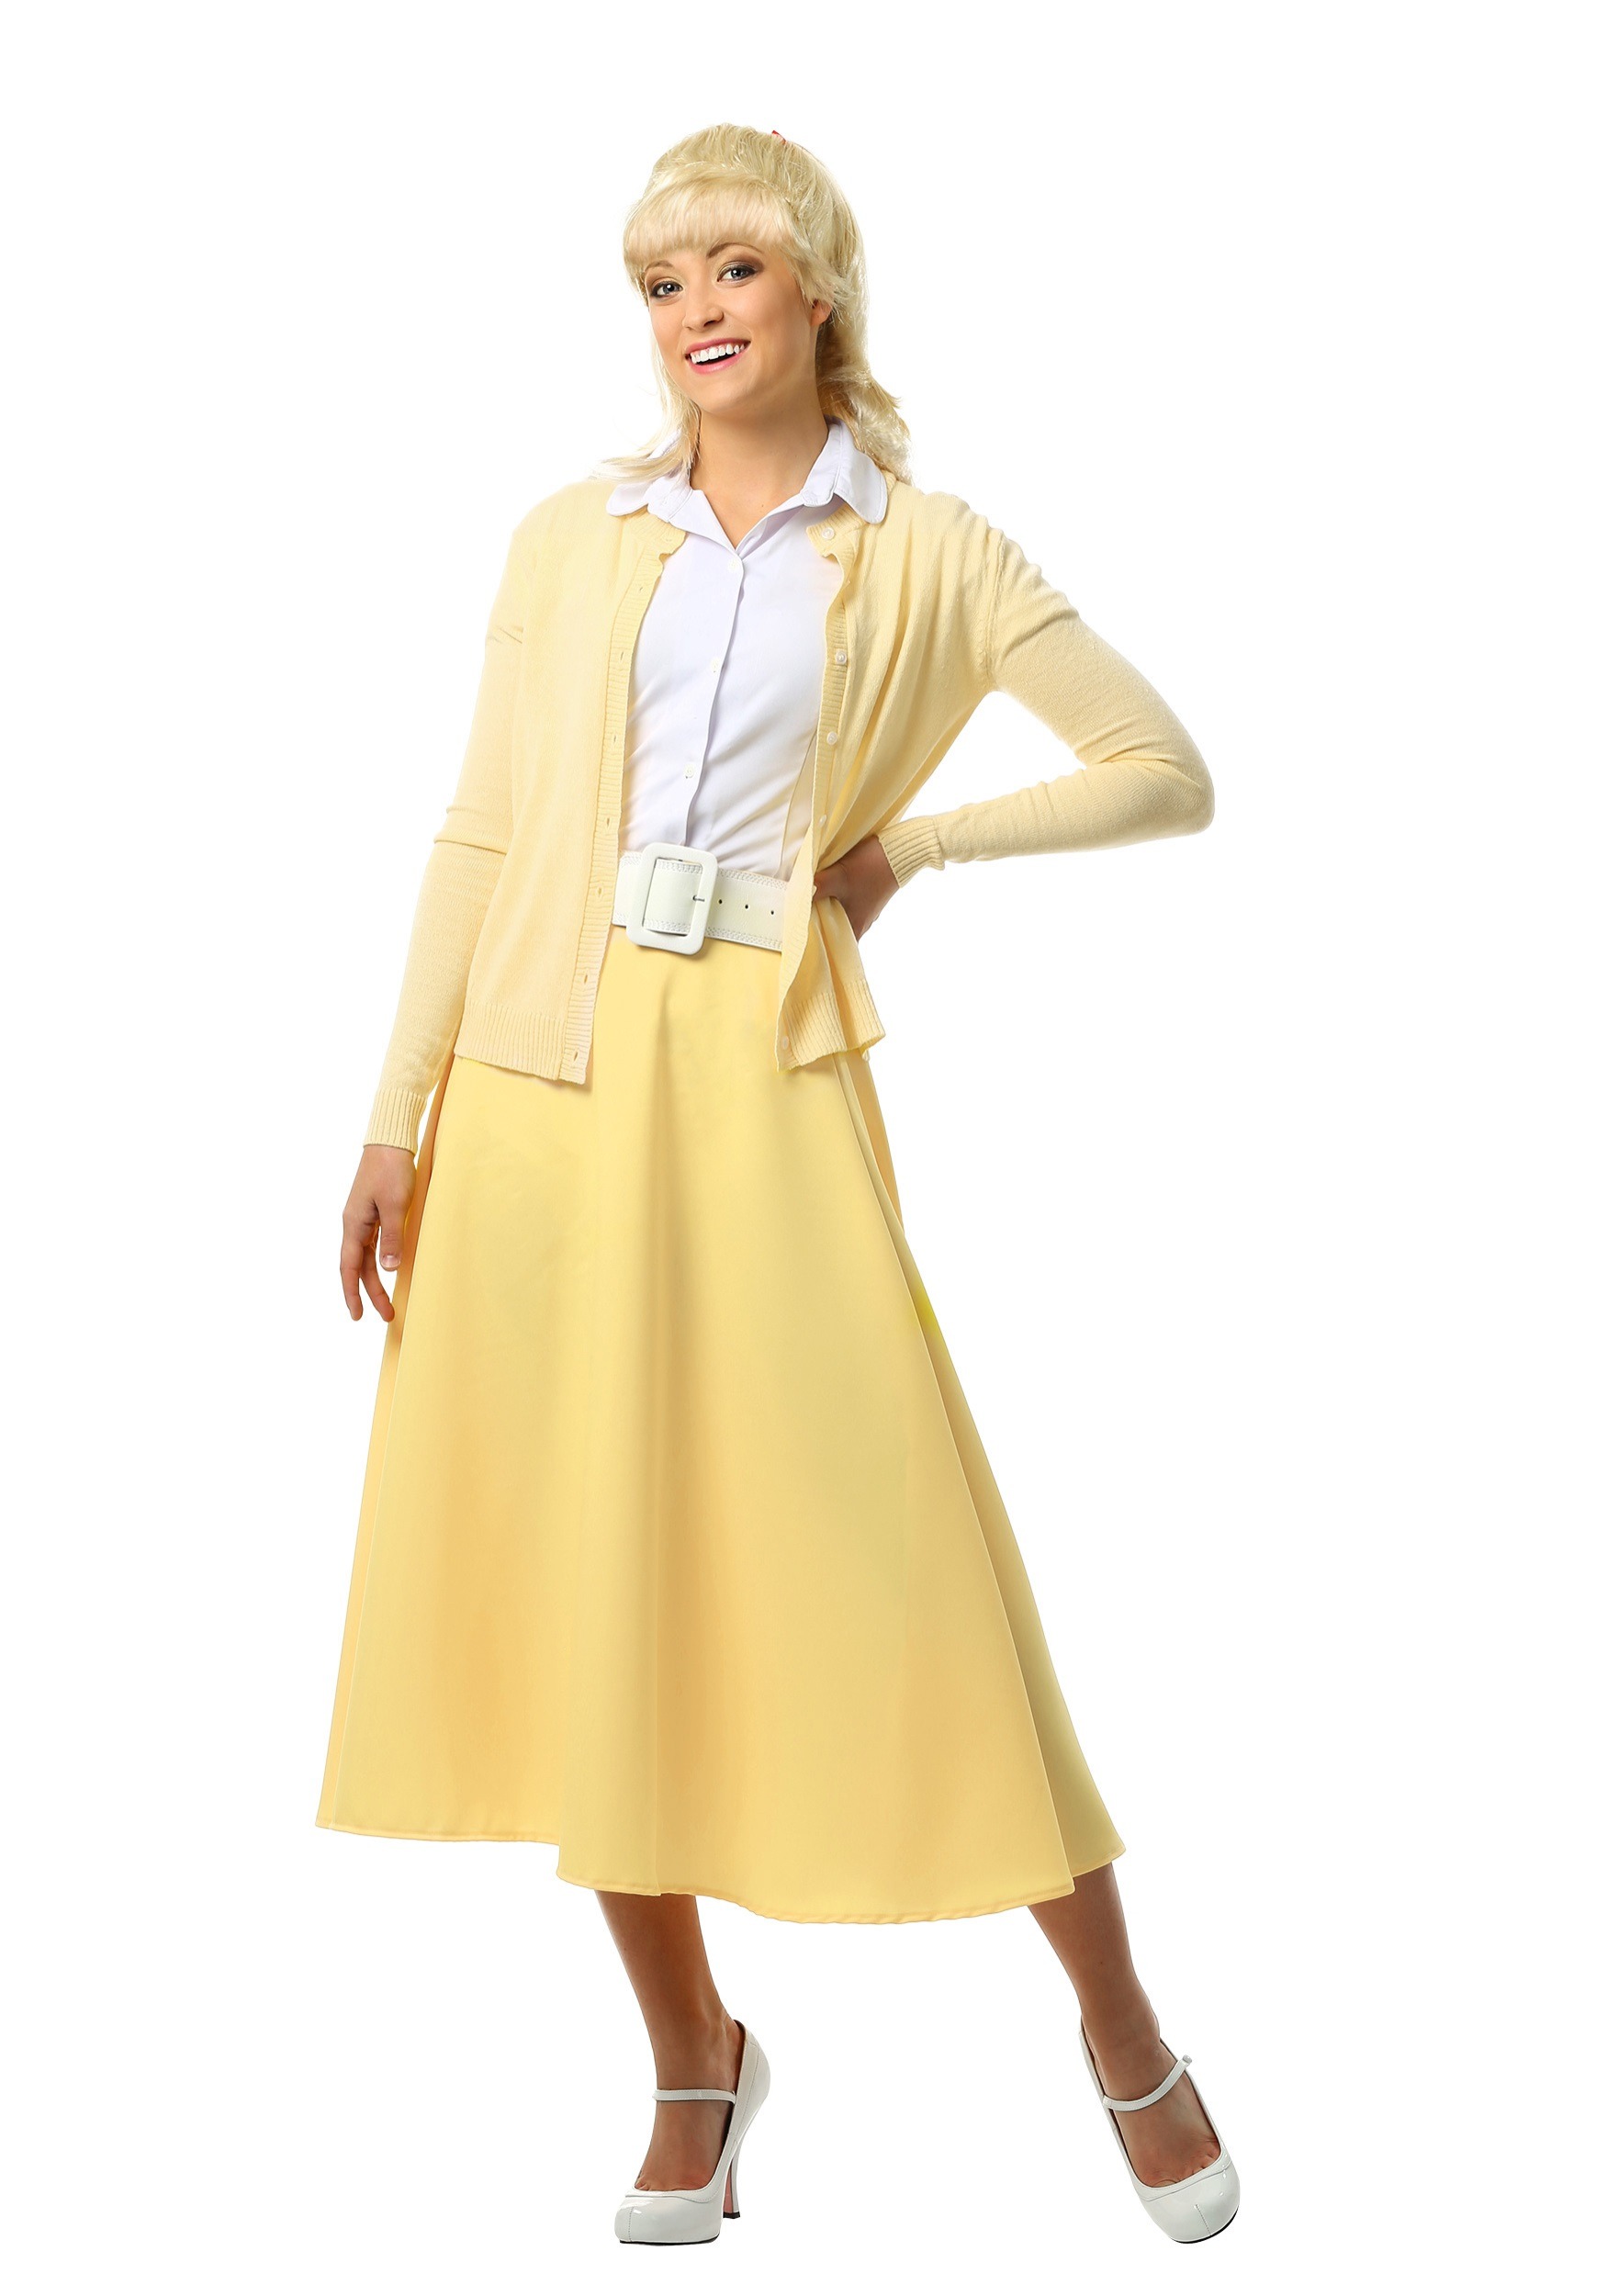 1950s Costumes- Poodle Skirts, Car Hop, Monroe, Pin Up, I Love Lucy Grease Good Sandy Womens Costume Dress $79.99 AT vintagedancer.com